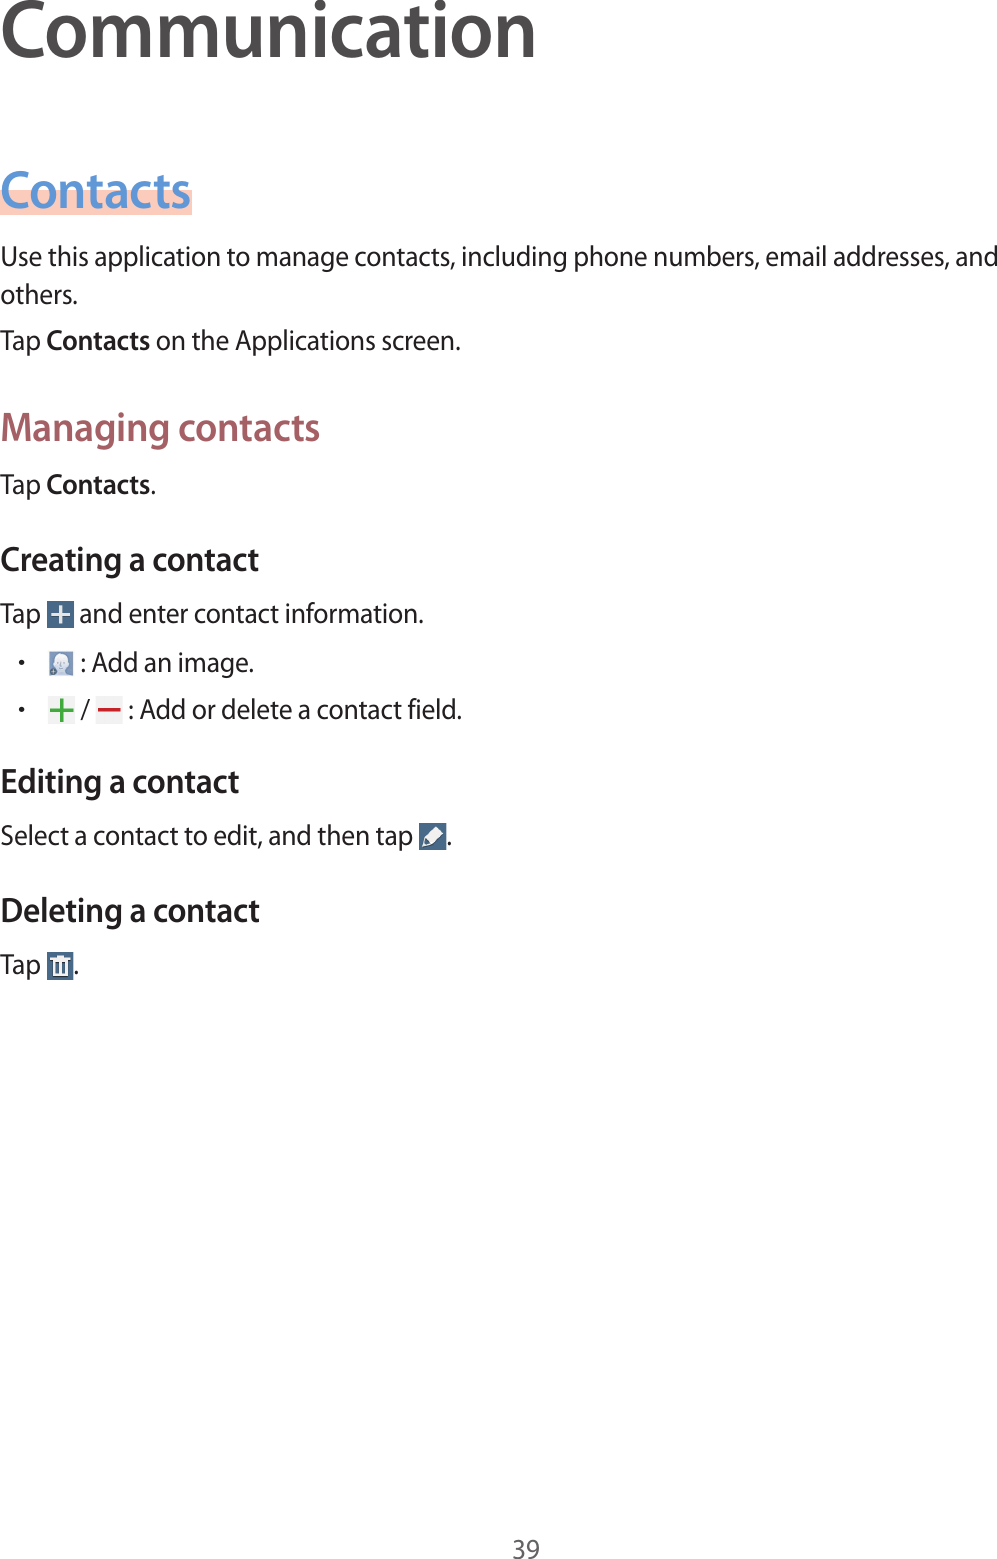 39CommunicationContactsUse this application to manage contacts, including phone numbers, email addresses, and others.Tap Contacts on the Applications screen.Managing contactsTap Contacts.Creating a contactTap   and enter contact information.• : Add an image.• /   : Add or delete a contact field.Editing a contactSelect a contact to edit, and then tap  .Deleting a contactTap  .